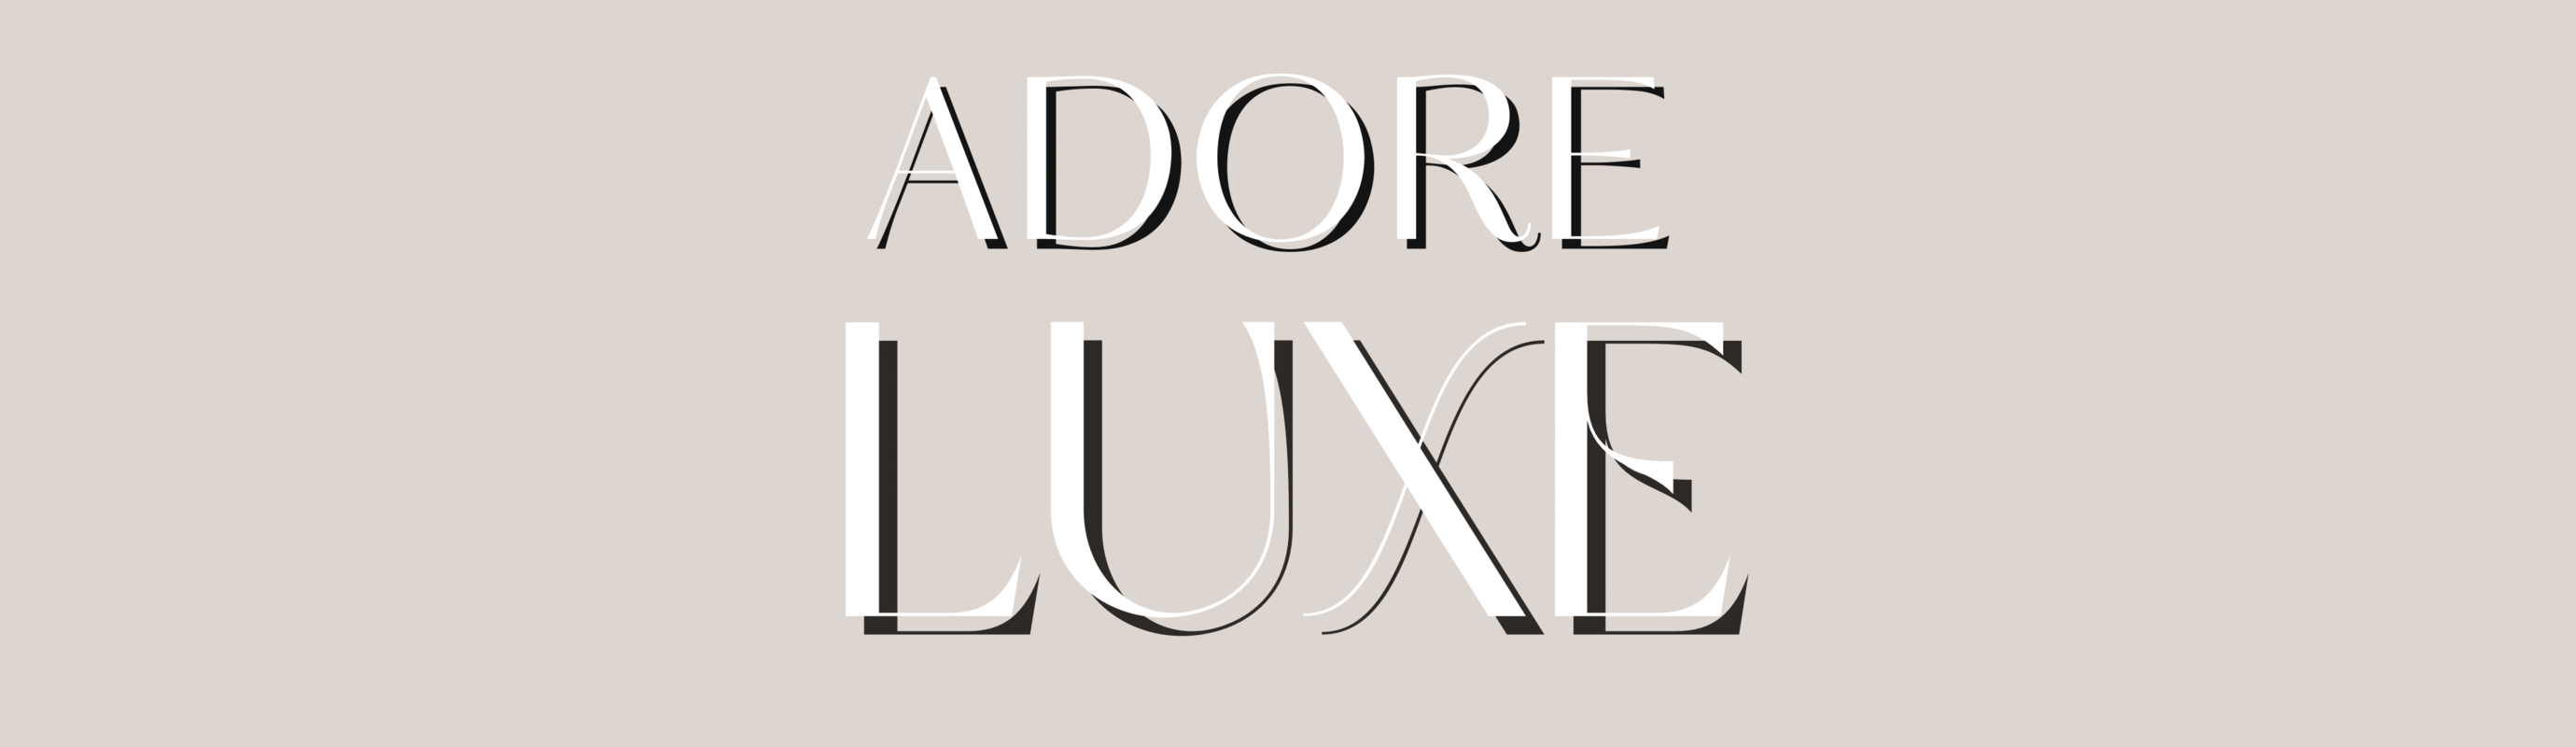 Introducing Adore Luxe!